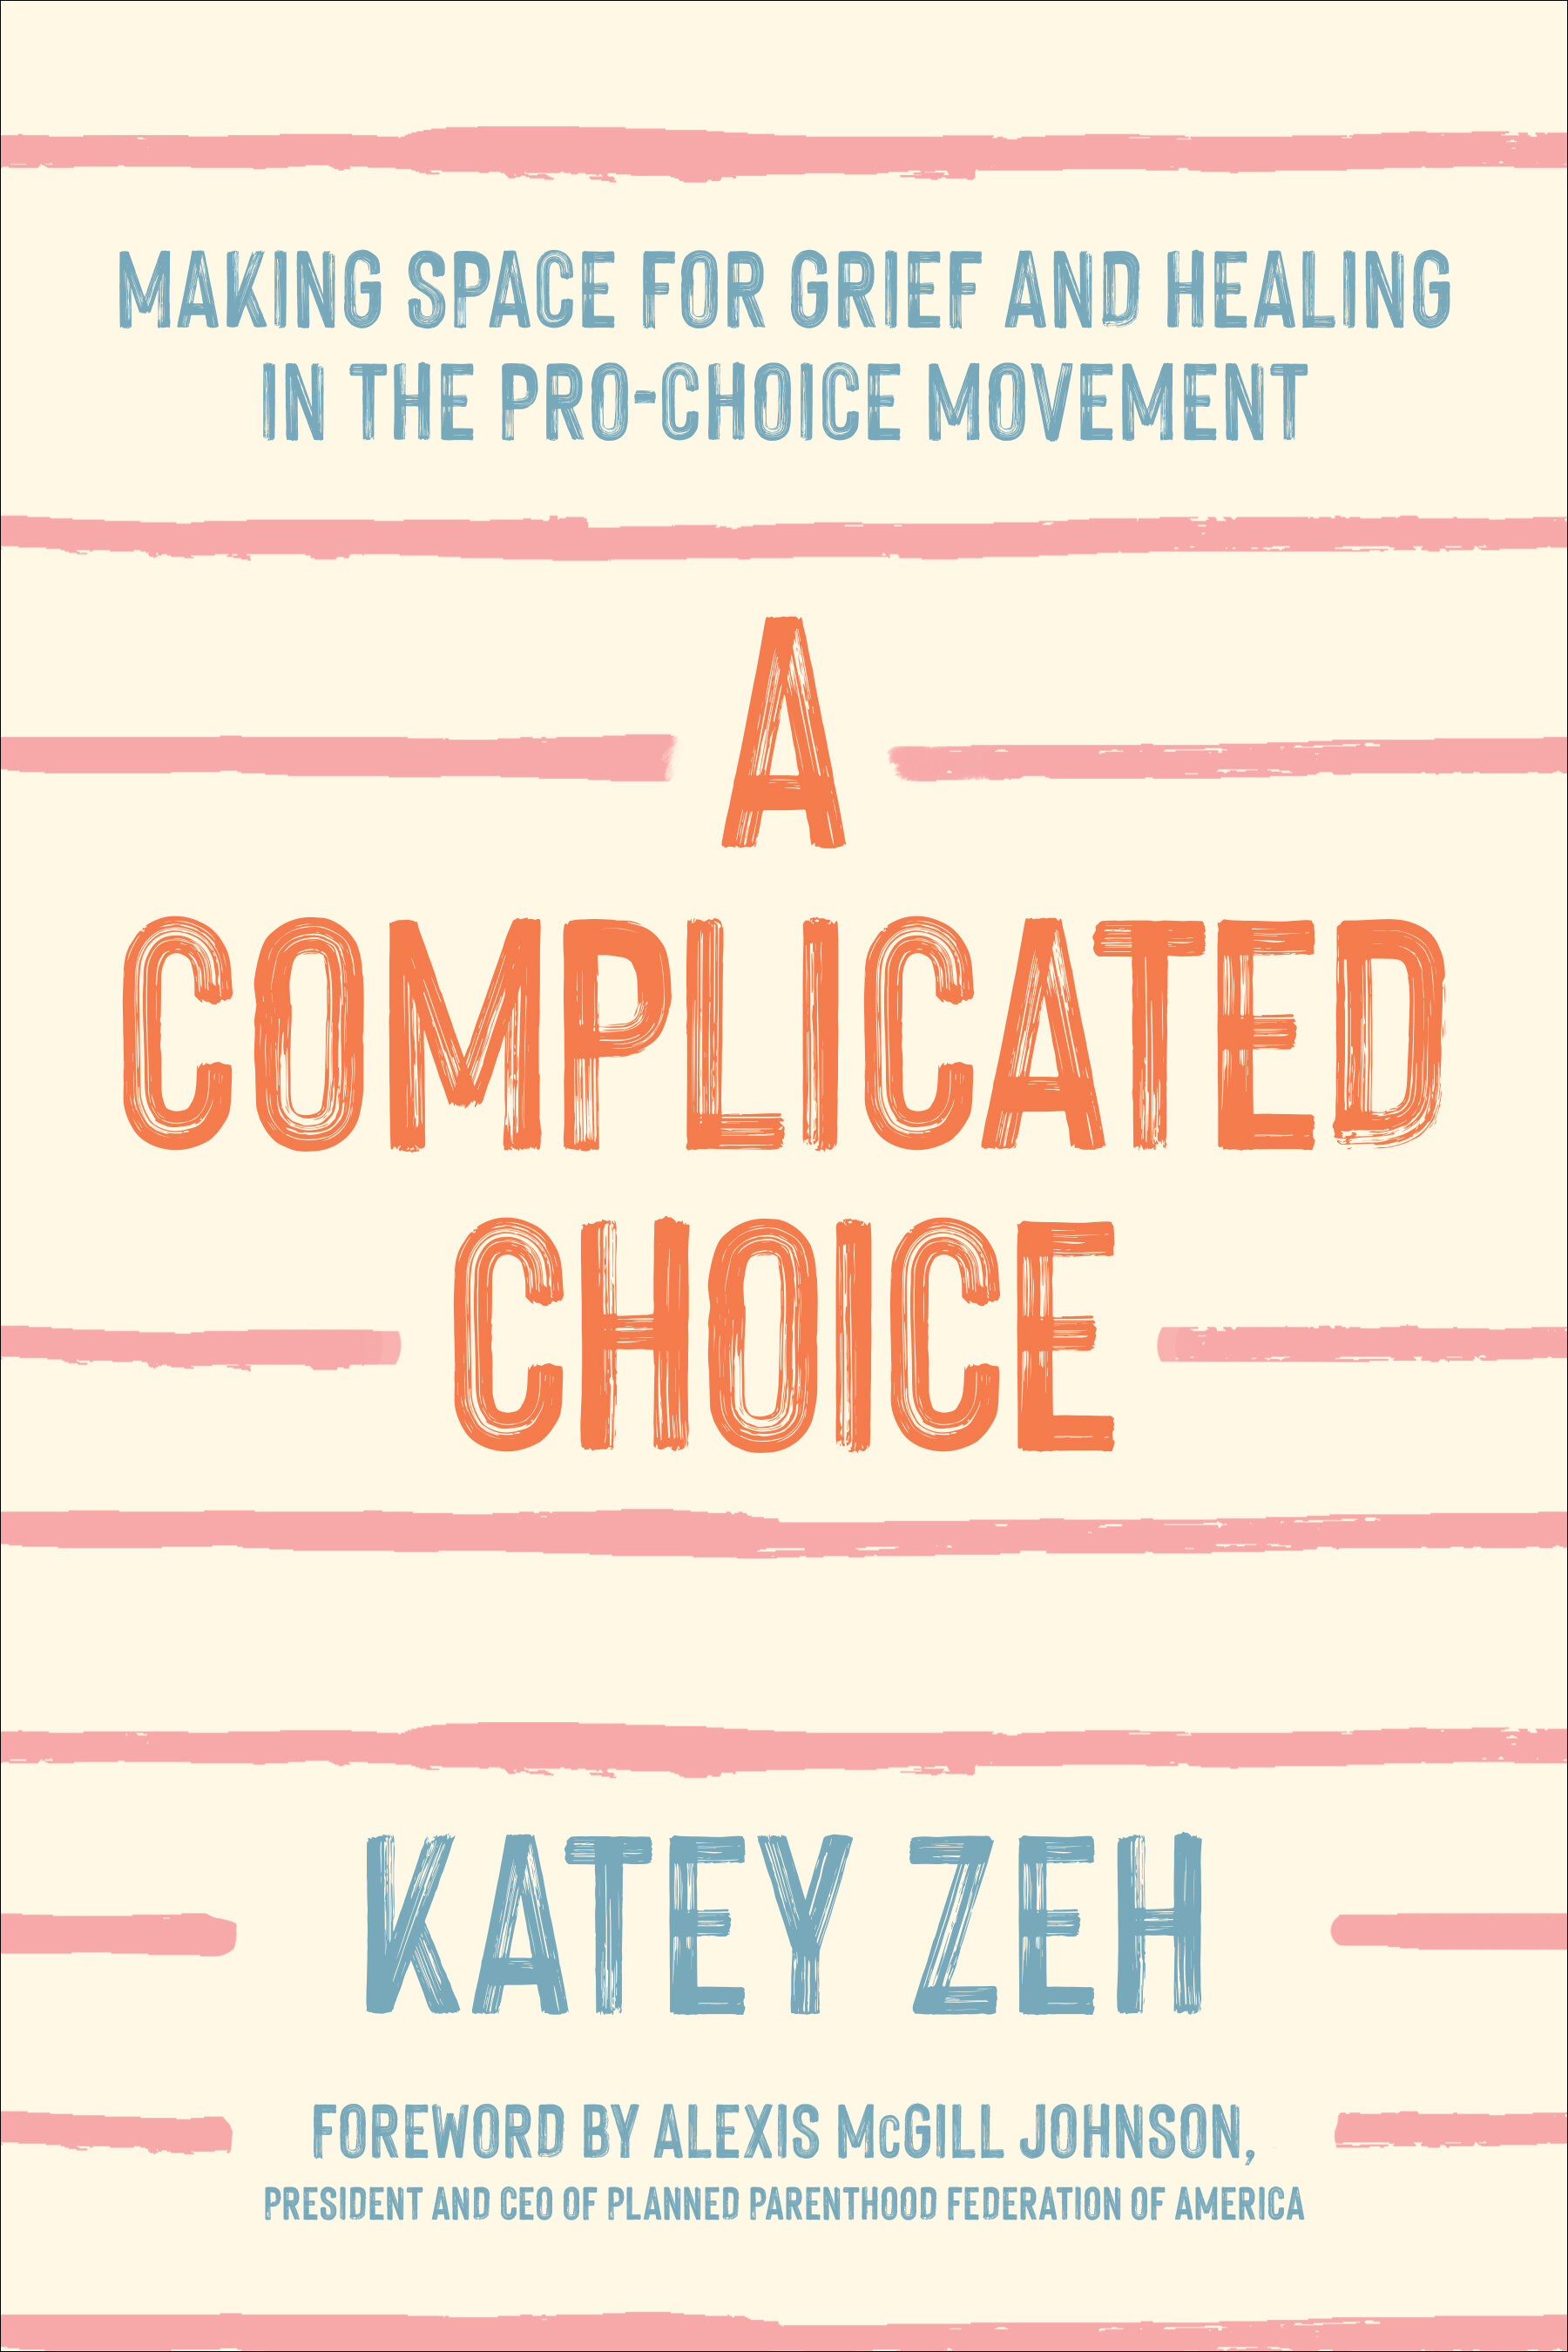 A Complicated Choice by Katey Zeh